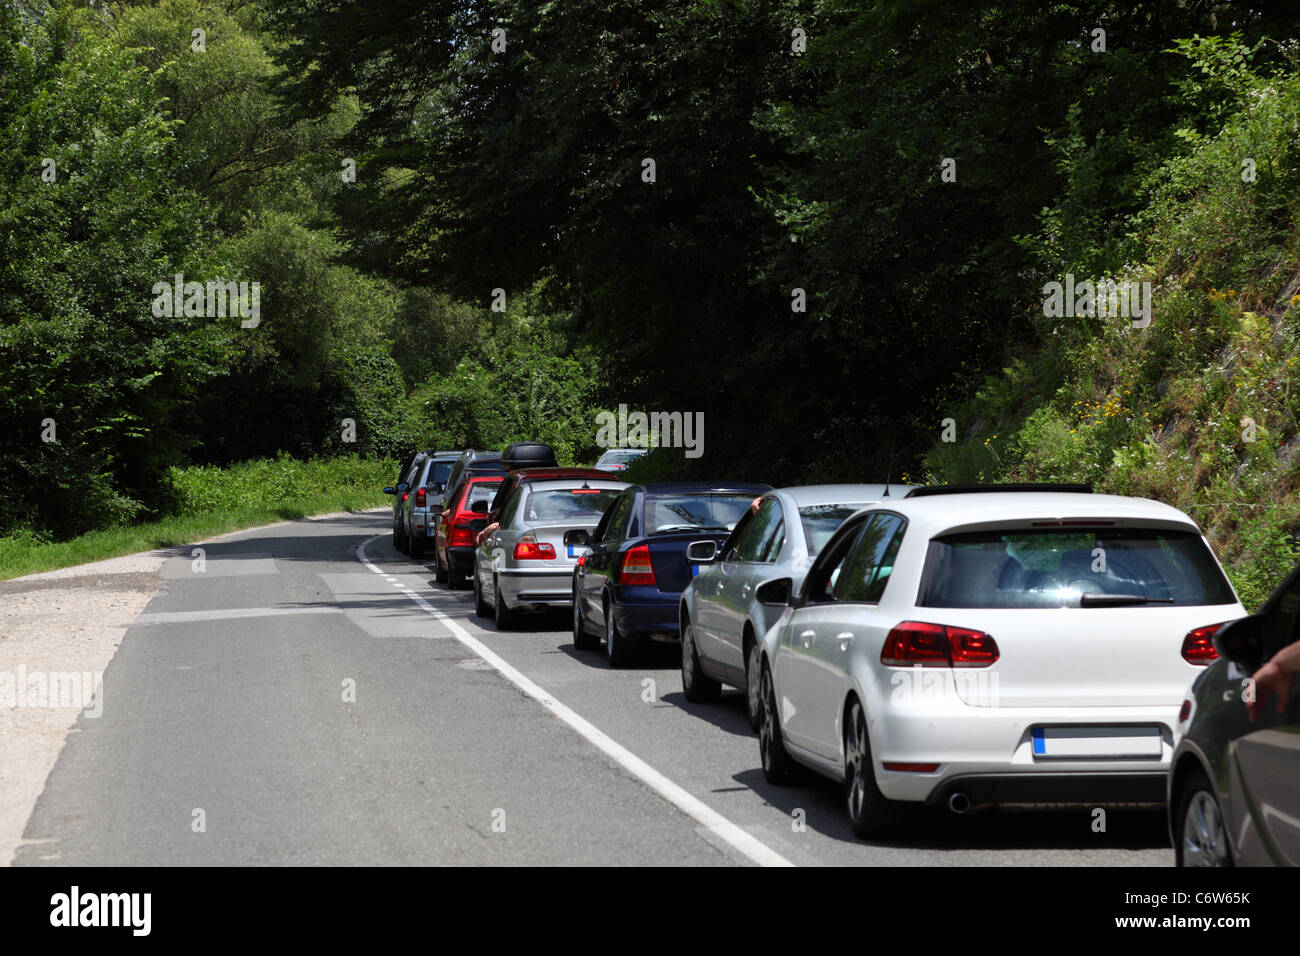 Cars in a traffic jam on a country road Stock Photo